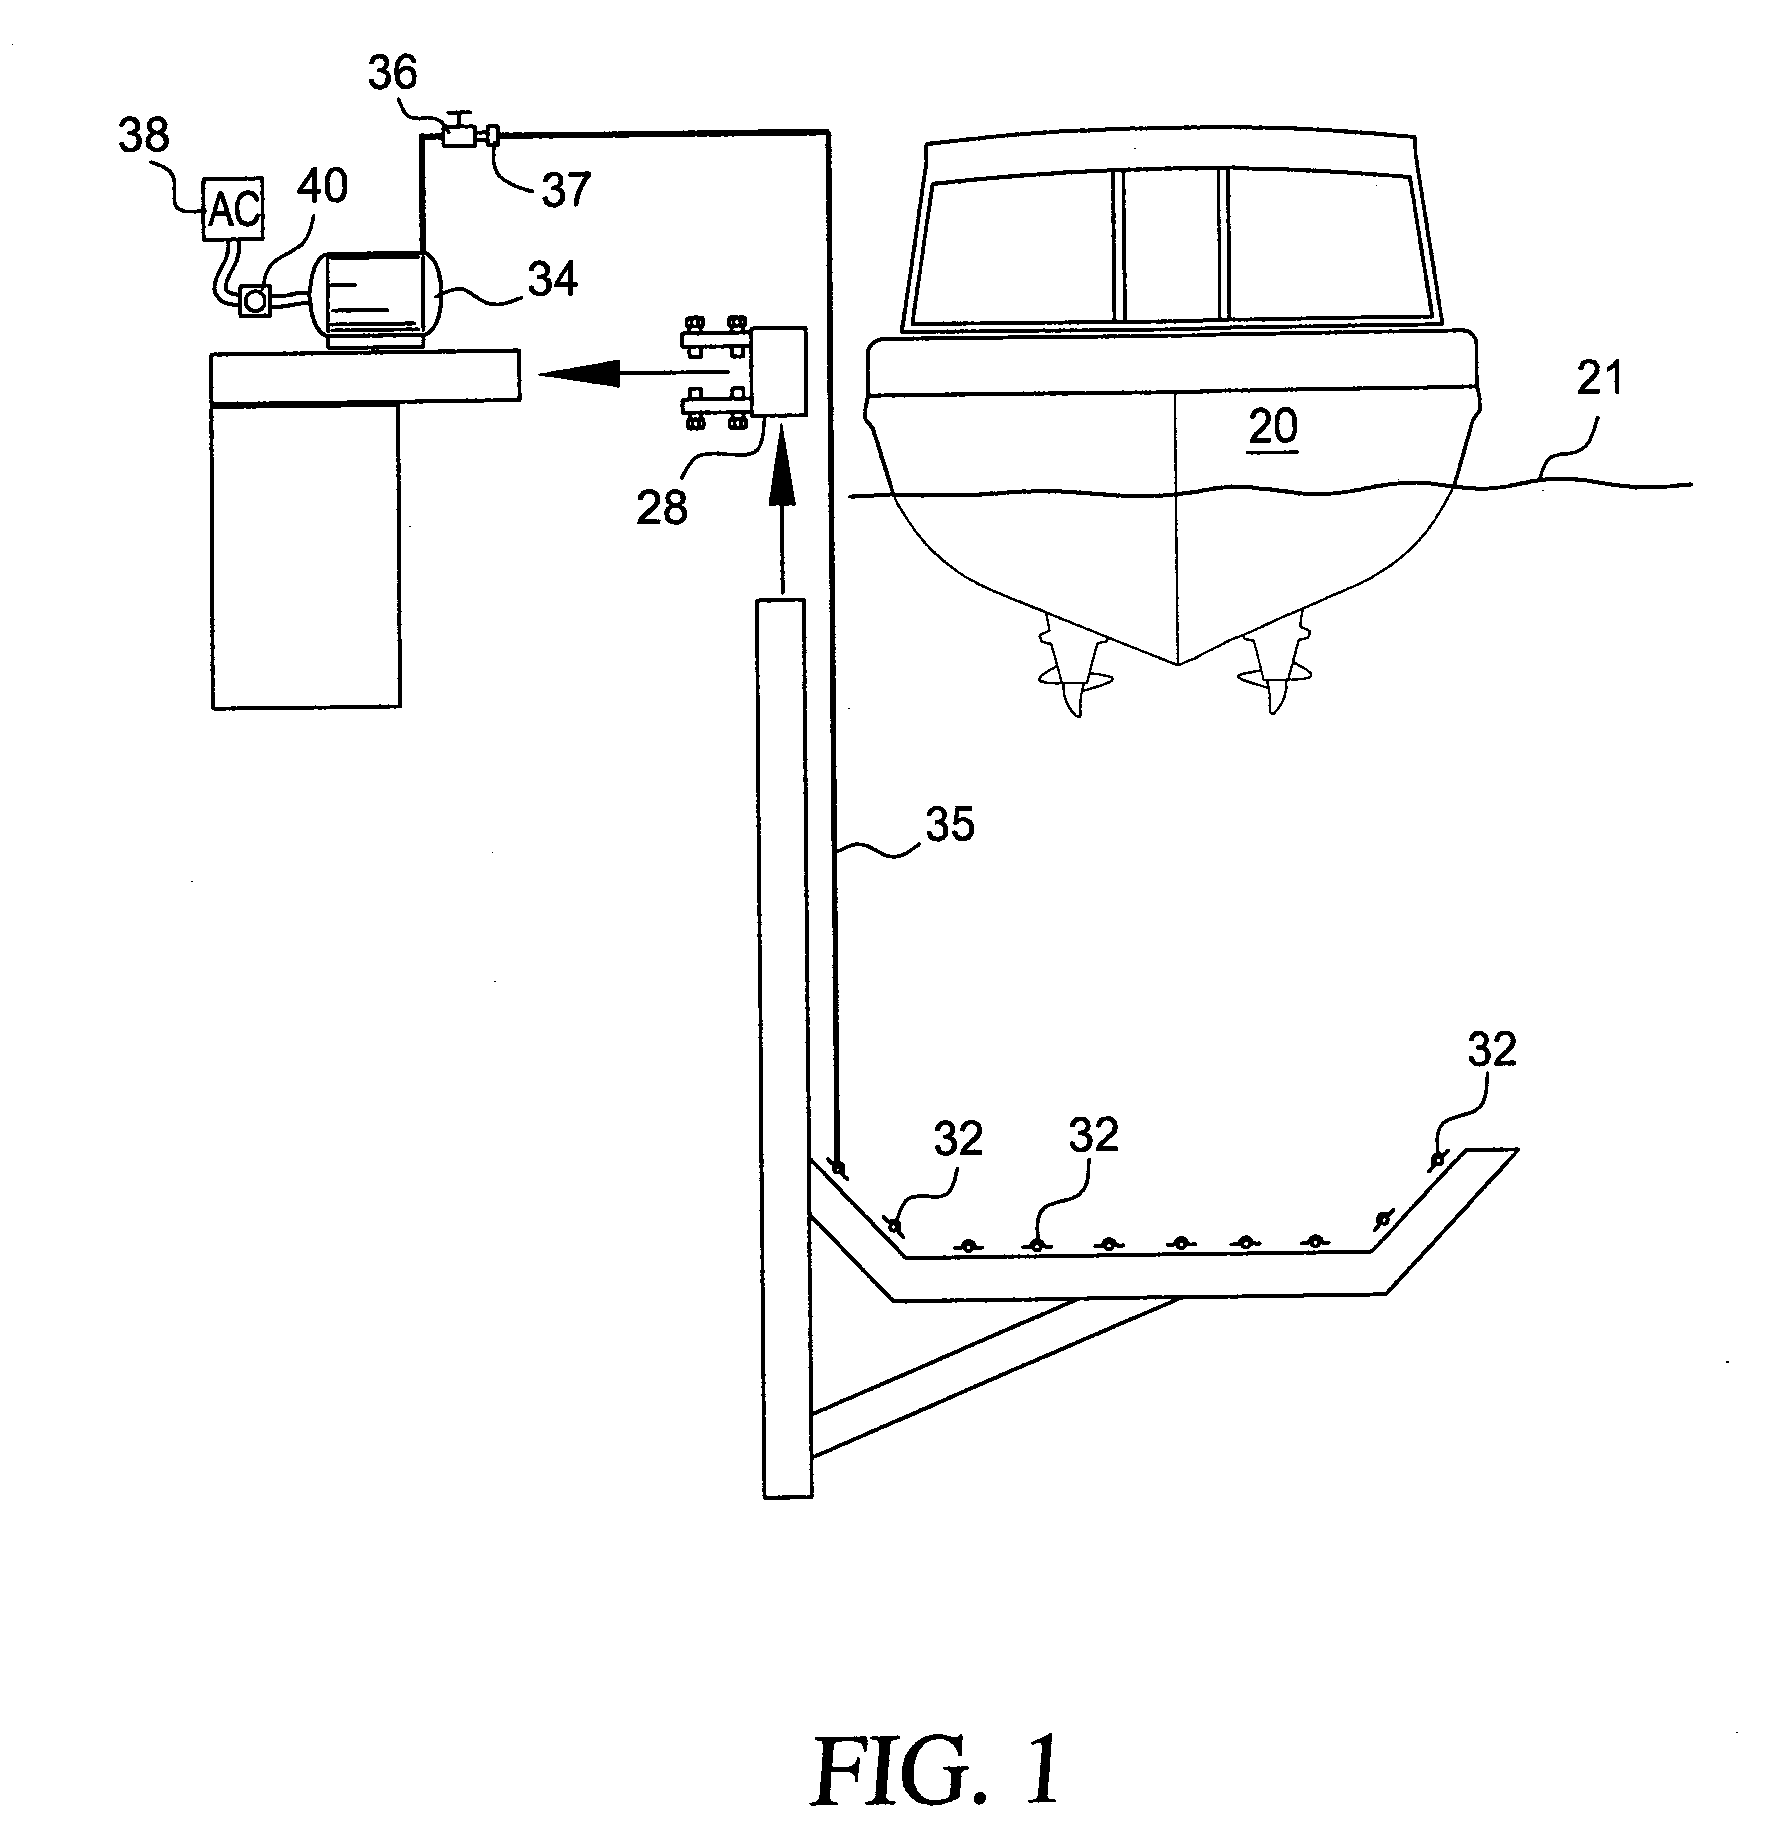 Apparatus and Method for Inhibiting Fouling of an Underwater Surface